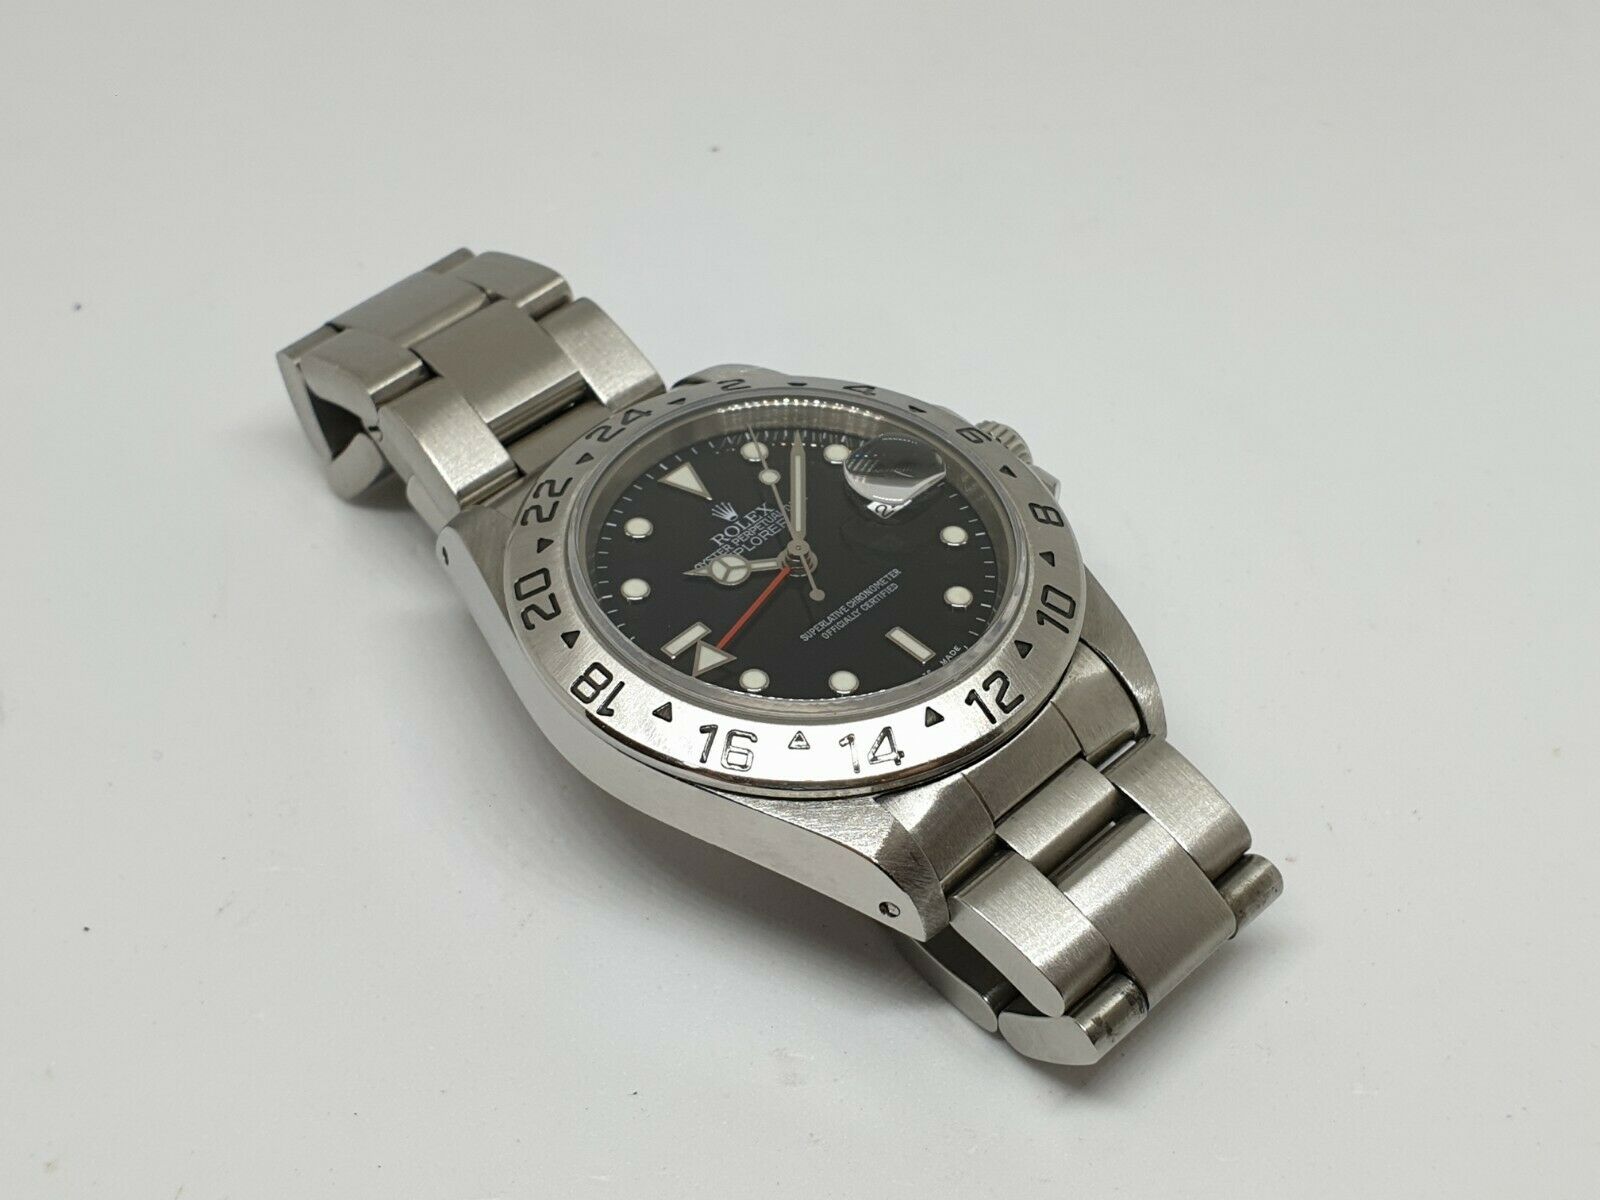 Rolex Oyster Perpetual Black 40mm Discontinued Explorer 2 Ref: 16570 (t Series)